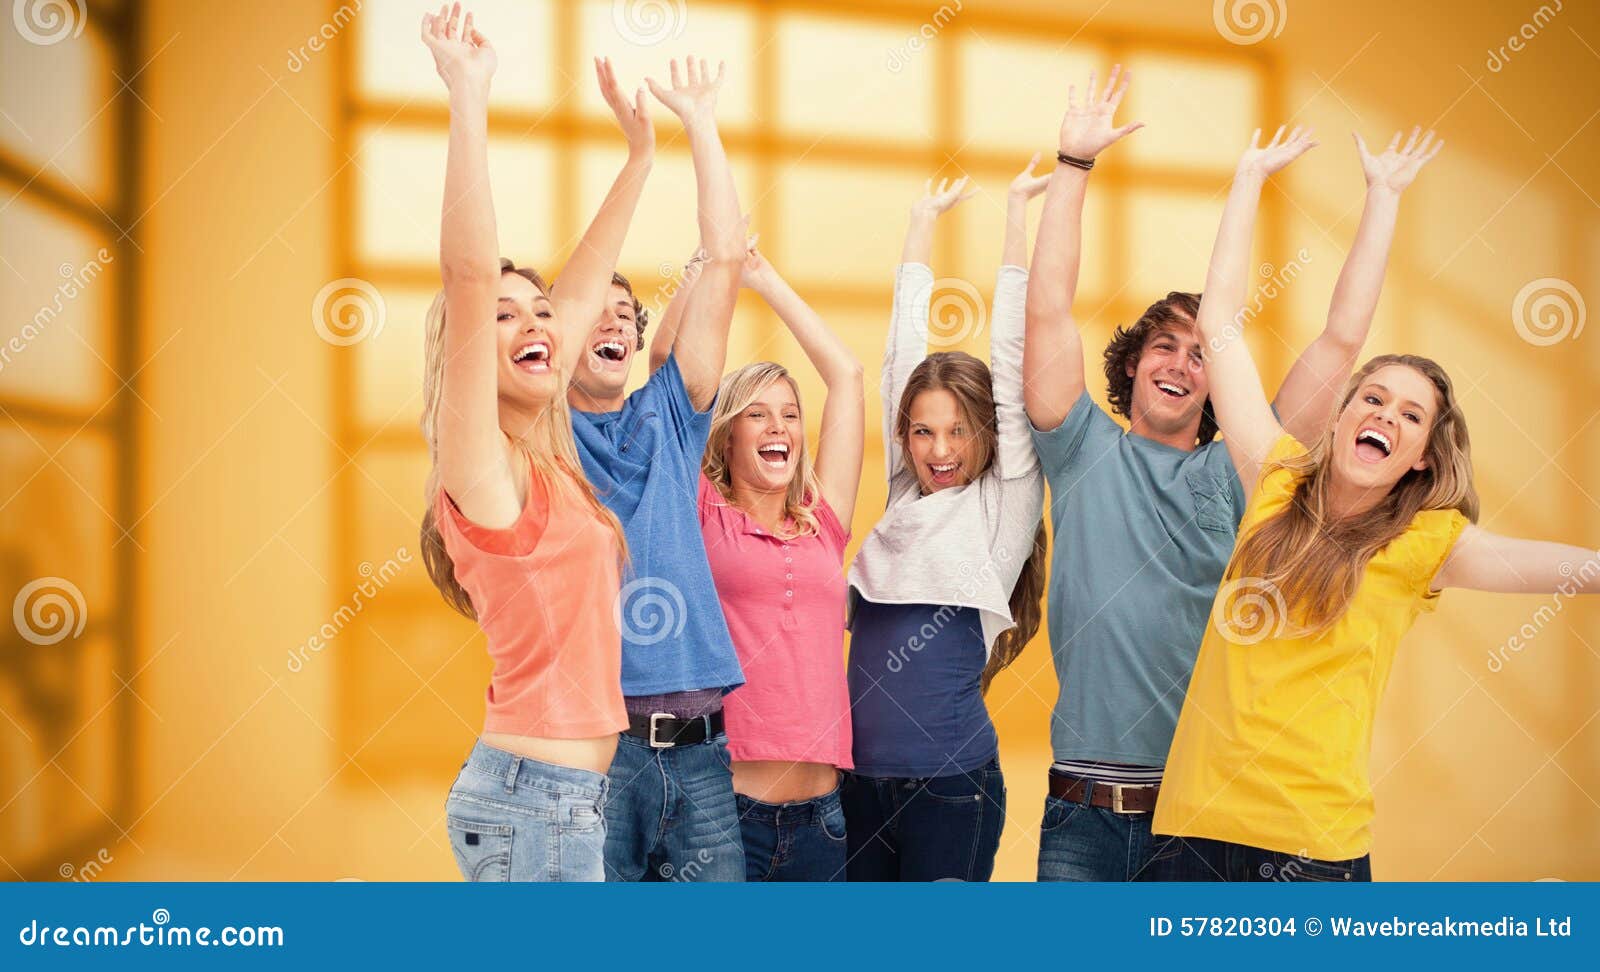 Composite Image Of A Jumping Happy Group Cheering Stock Photo Image